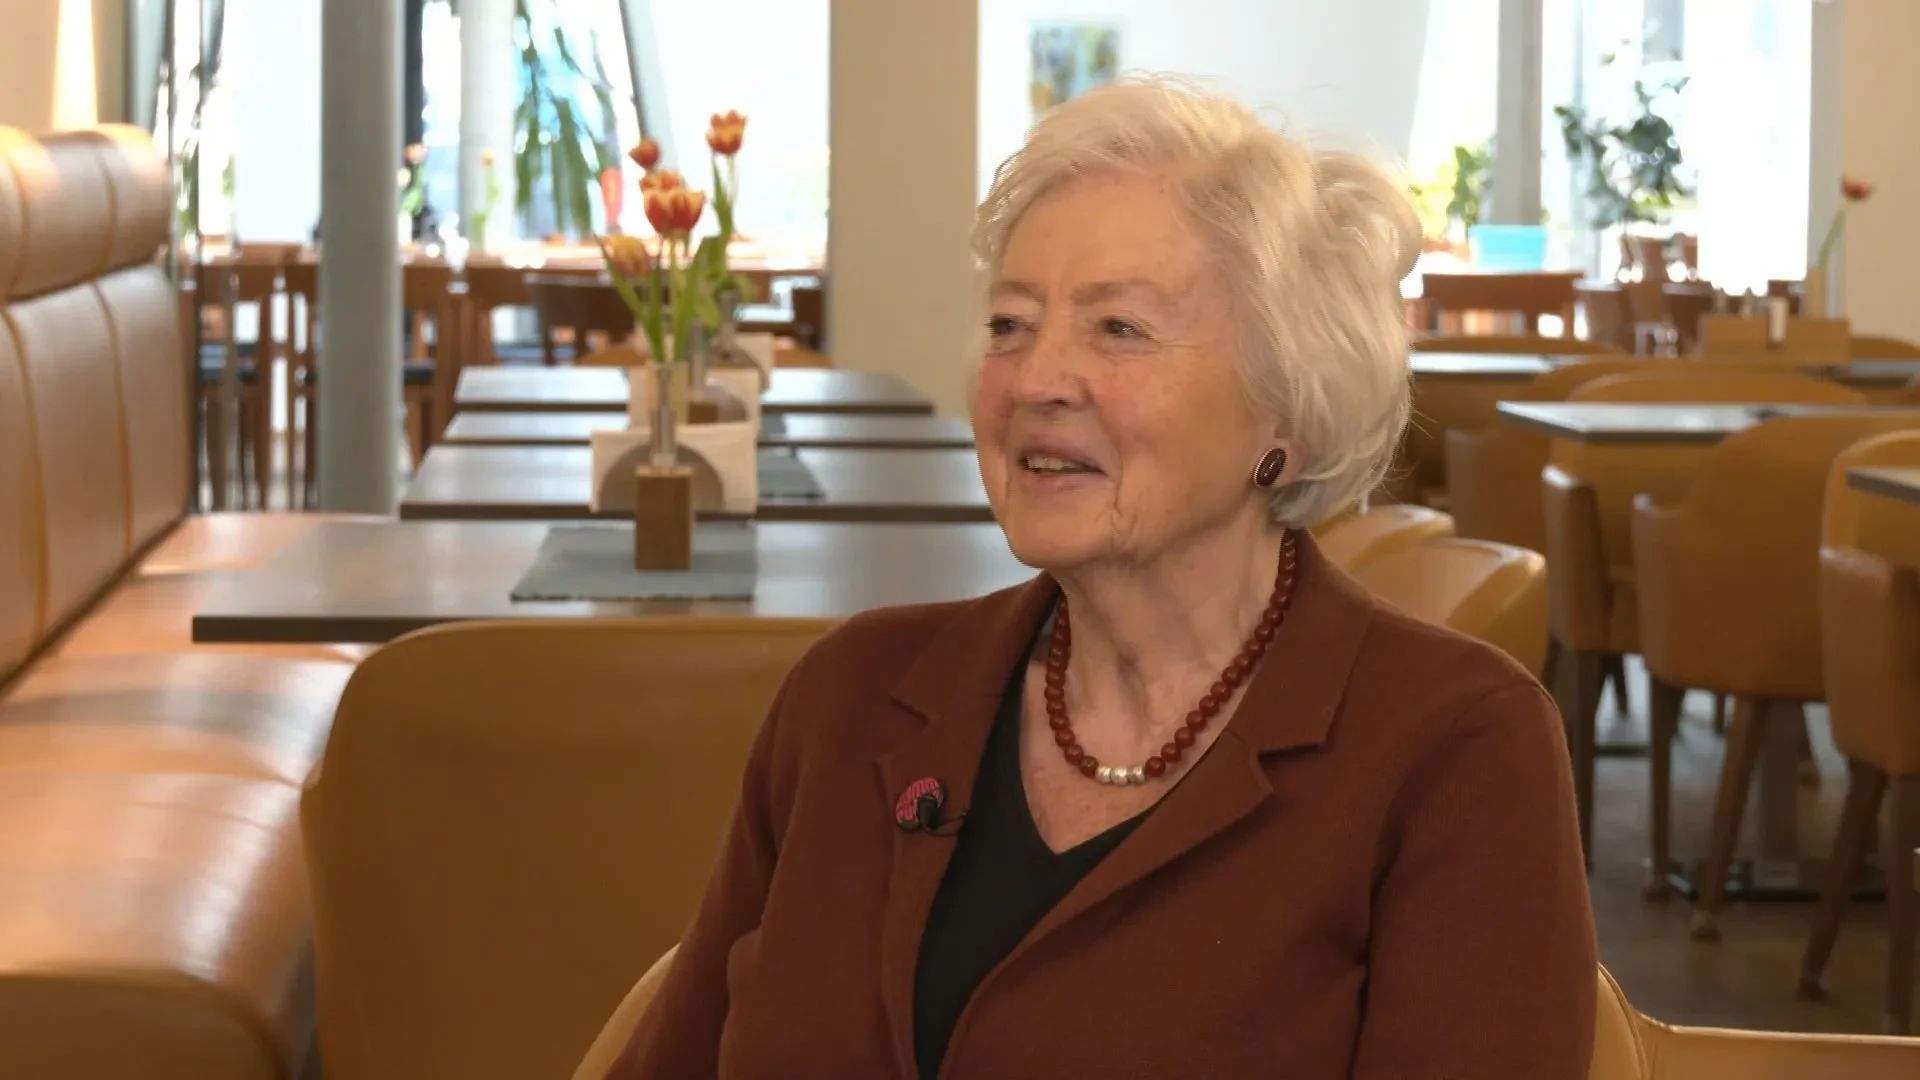 SPD icon Renate Schmidt: The role of women in politics through the ages